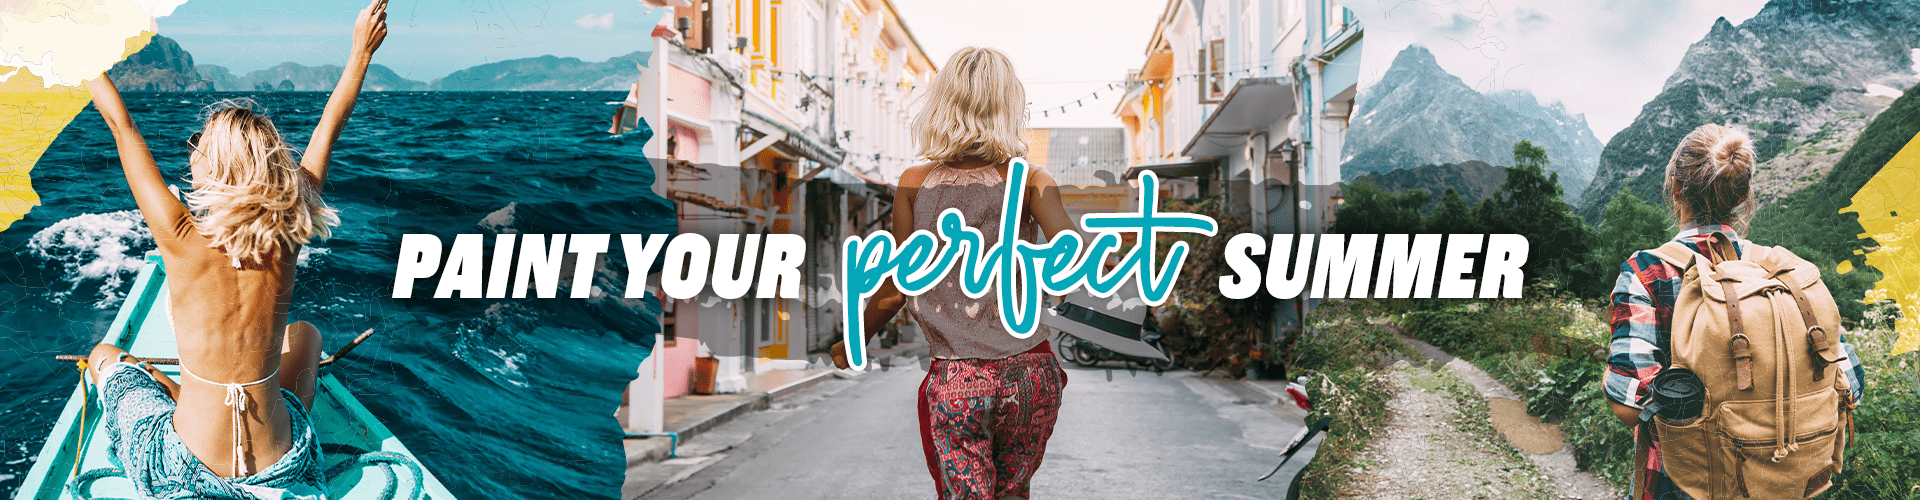 Paint your perfect summer